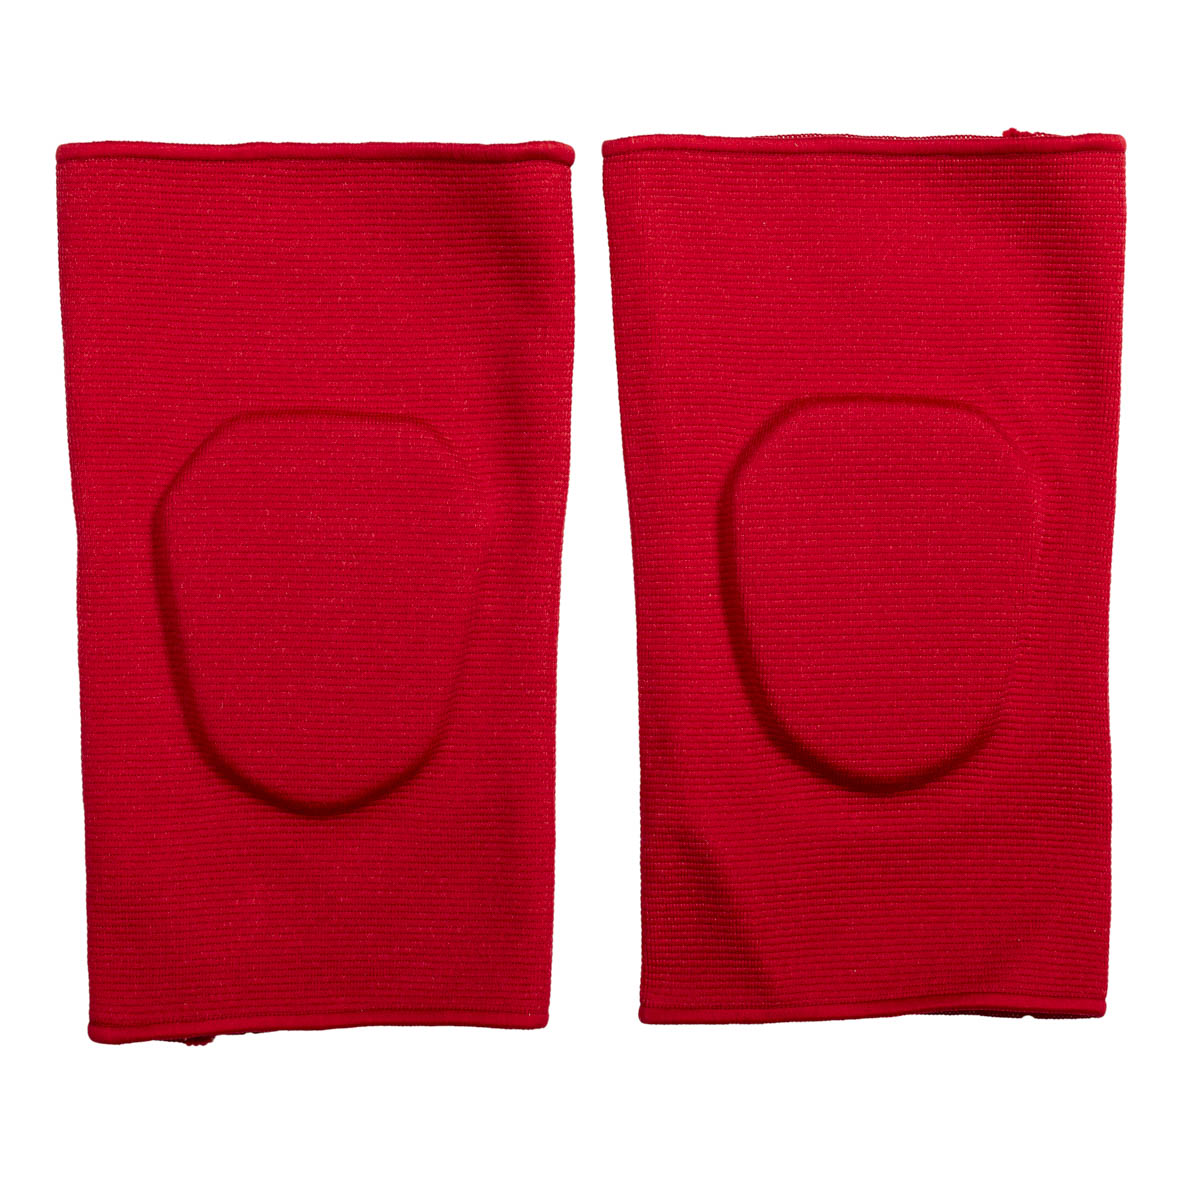 Versatile Knee Pads Multiple Colors for Workout, Rollerblading, Halloween Costumes, and Cosplay Accessories Red